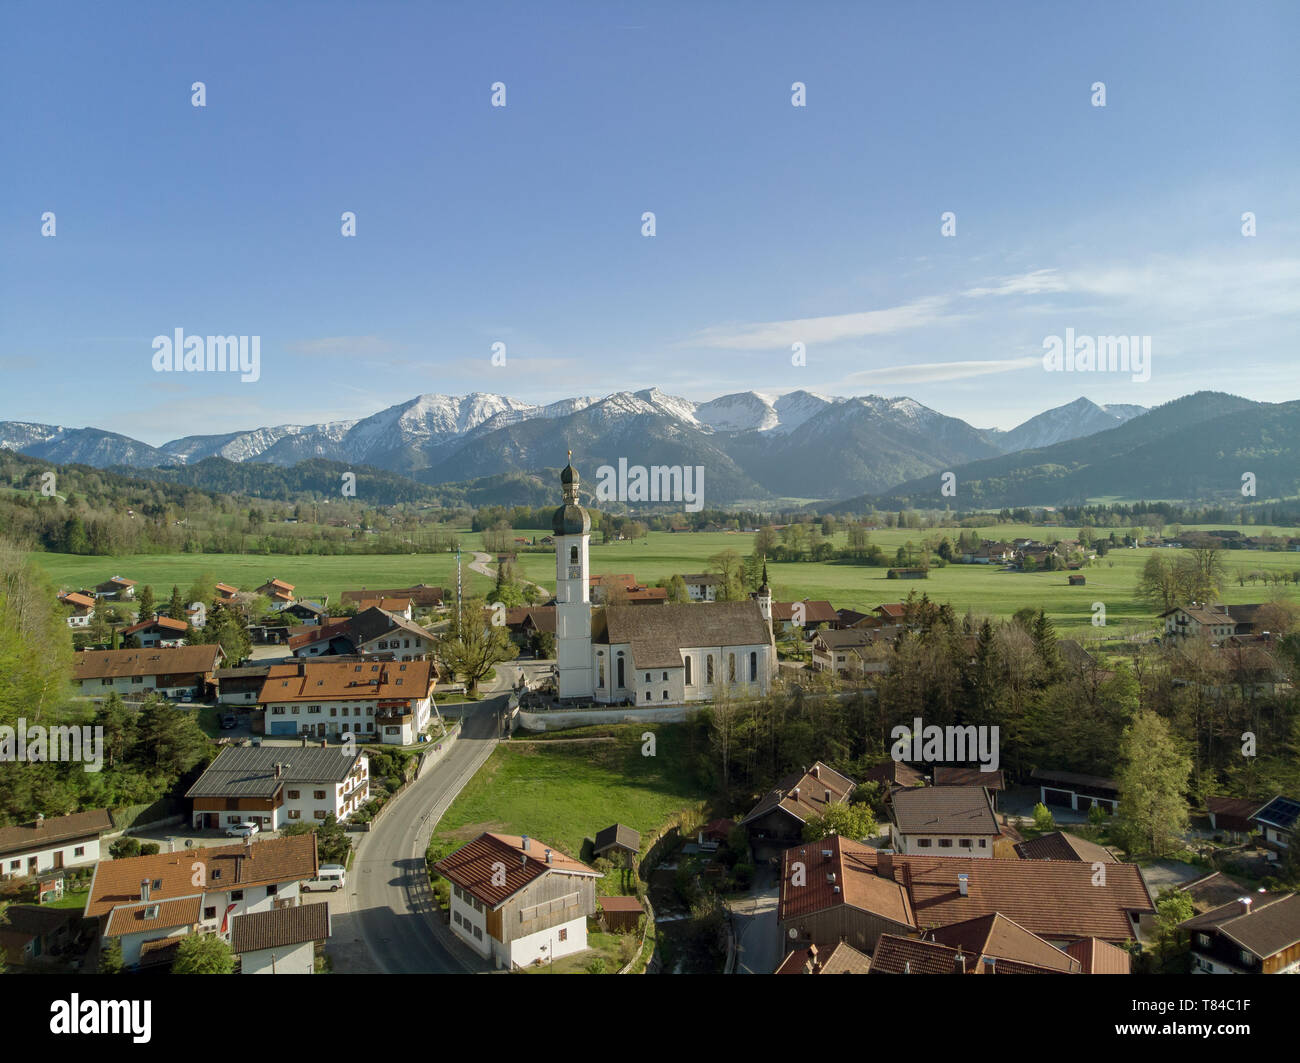 Aerial view of Bavarian village in beautiful landscape with alps and blue sky Stock Photo